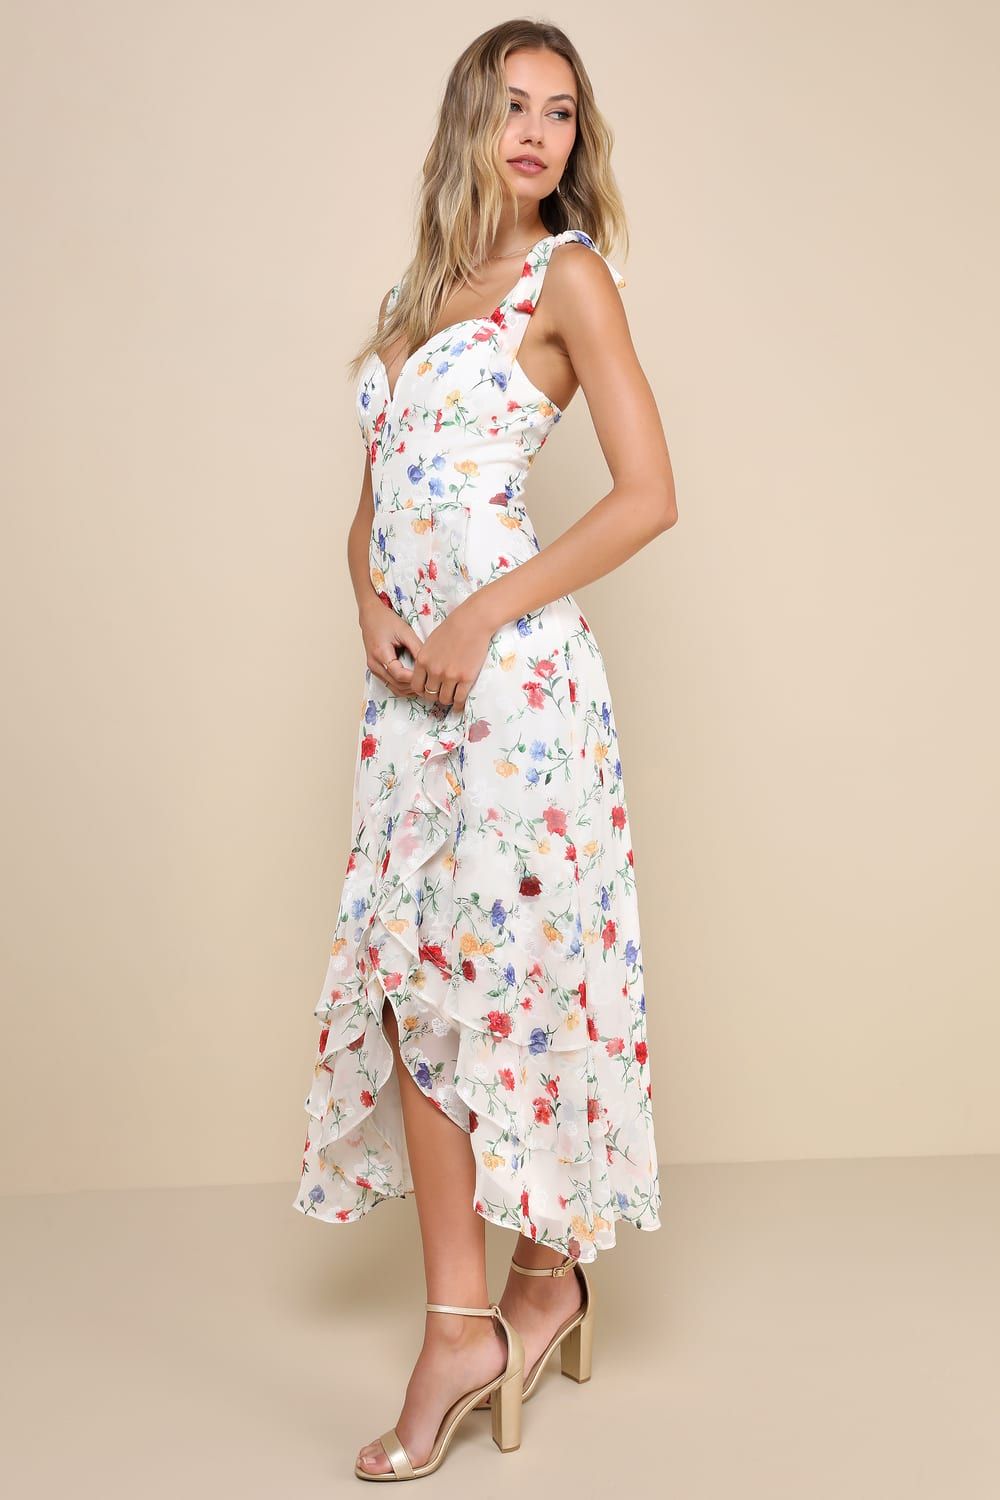 So Elevated Ivory Floral Jacquard Tie-Strap High-Low Midi Dress | Lulus